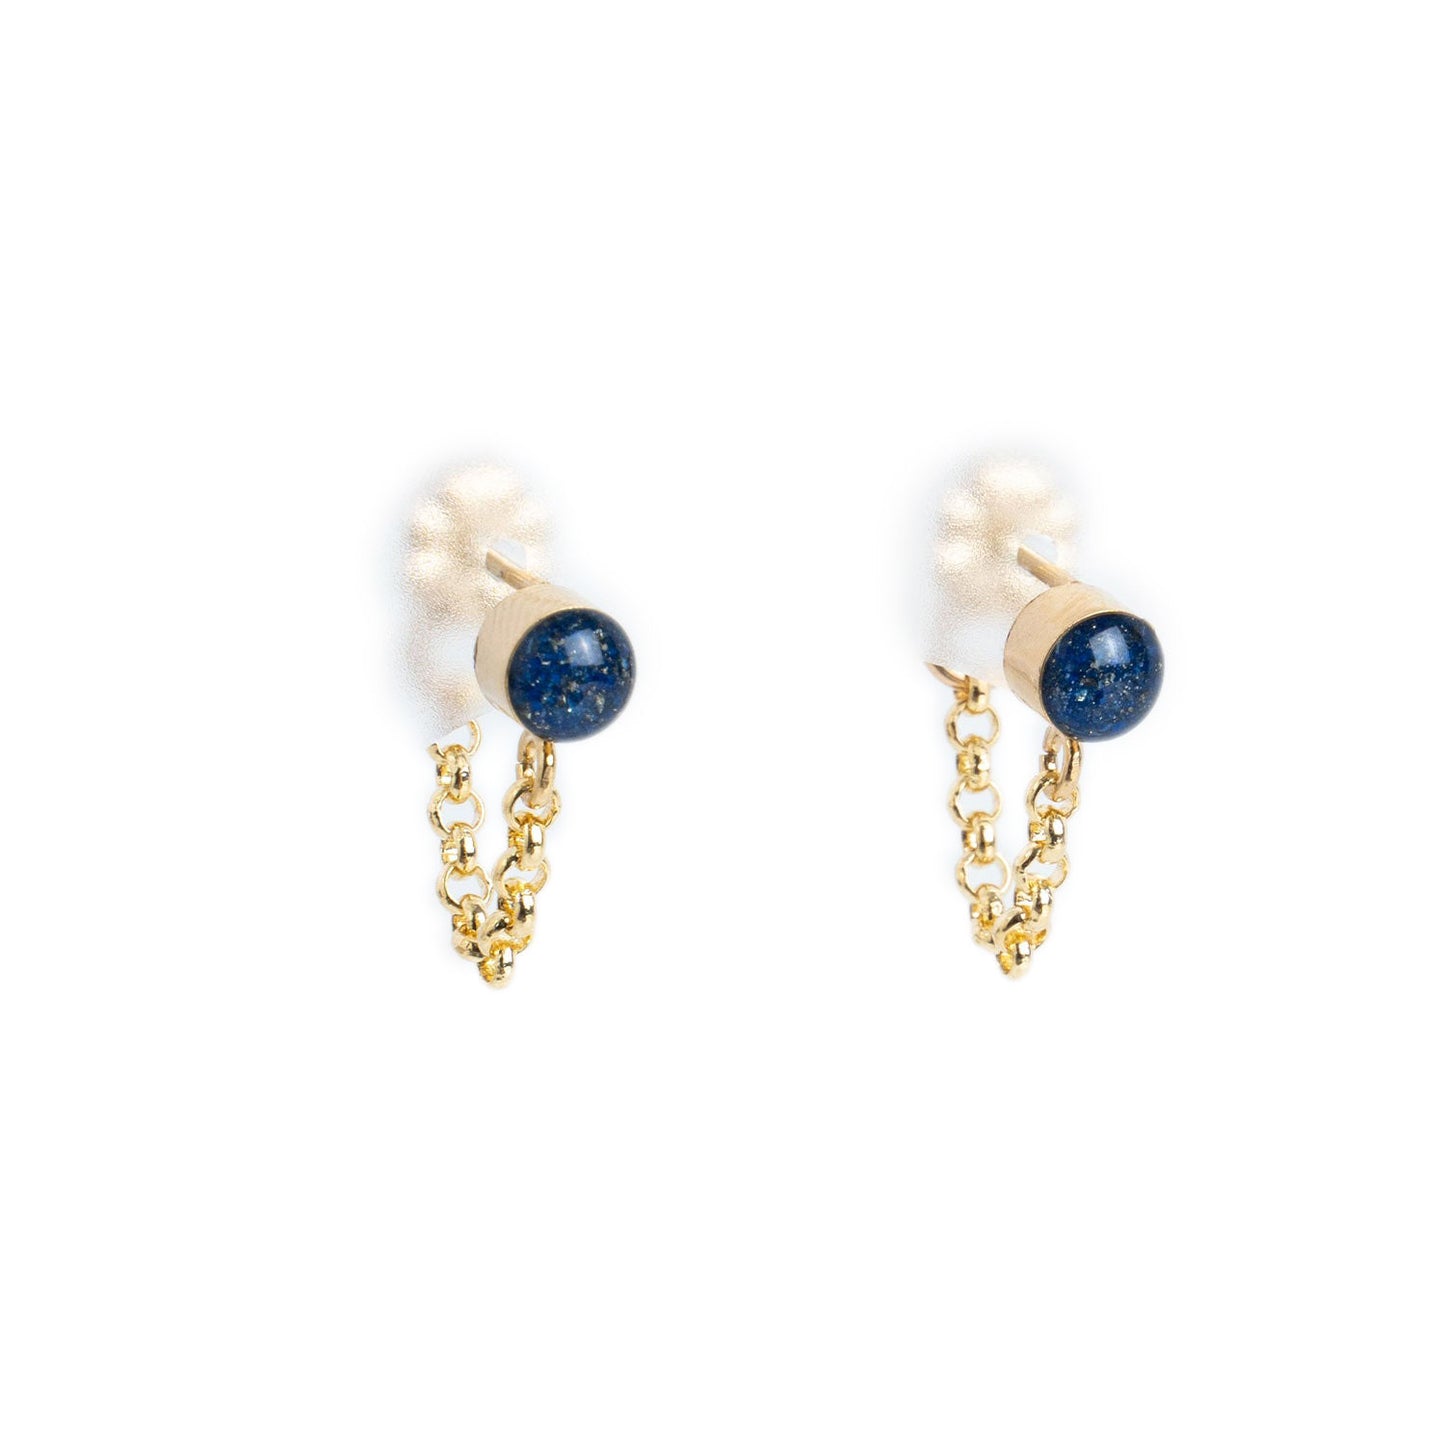 Tiny Lapis front to back earrings